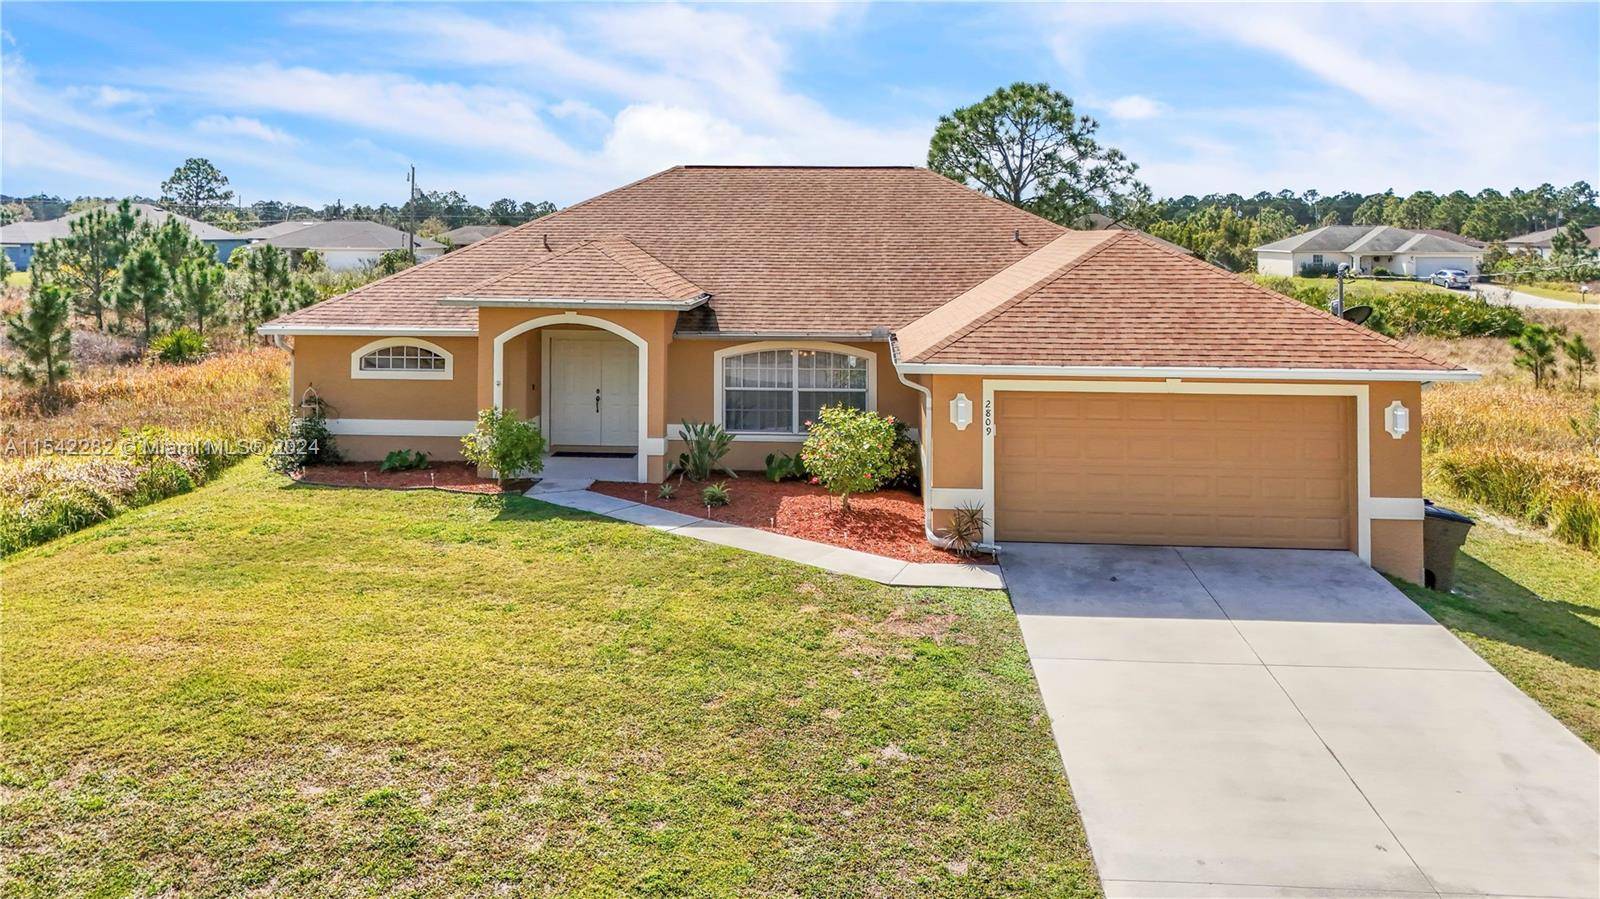 4 bed, 2 bath 2 car garage Built in 2007, Discover the perfect blend of comfort and style in this single family home for sale in Lehigh Acres with recently ...